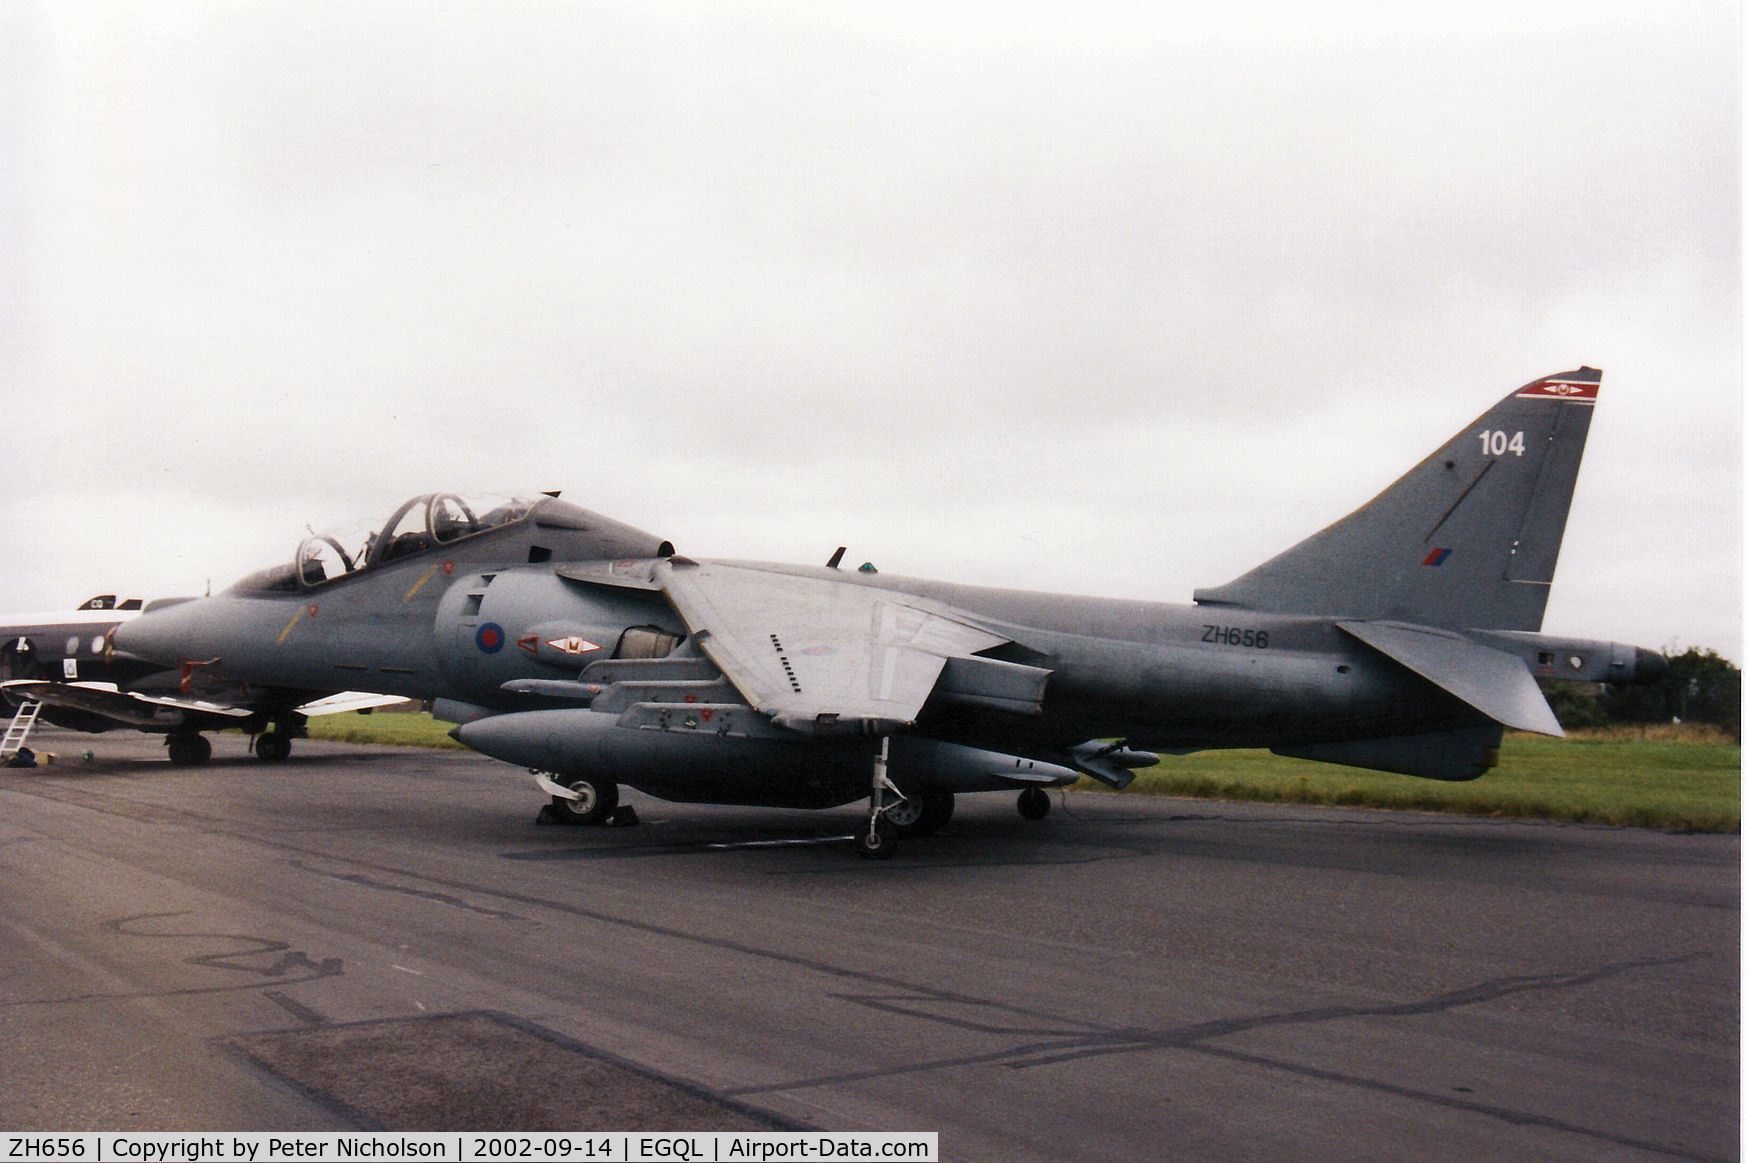 ZH656, 1994 British Aerospace Harrier T.10 C/N TX004, Harrier T.10, callsign Poison 1, of RAF Wittering's 1 Squadron on display at the 2002 RAF Leuchars Airshow.